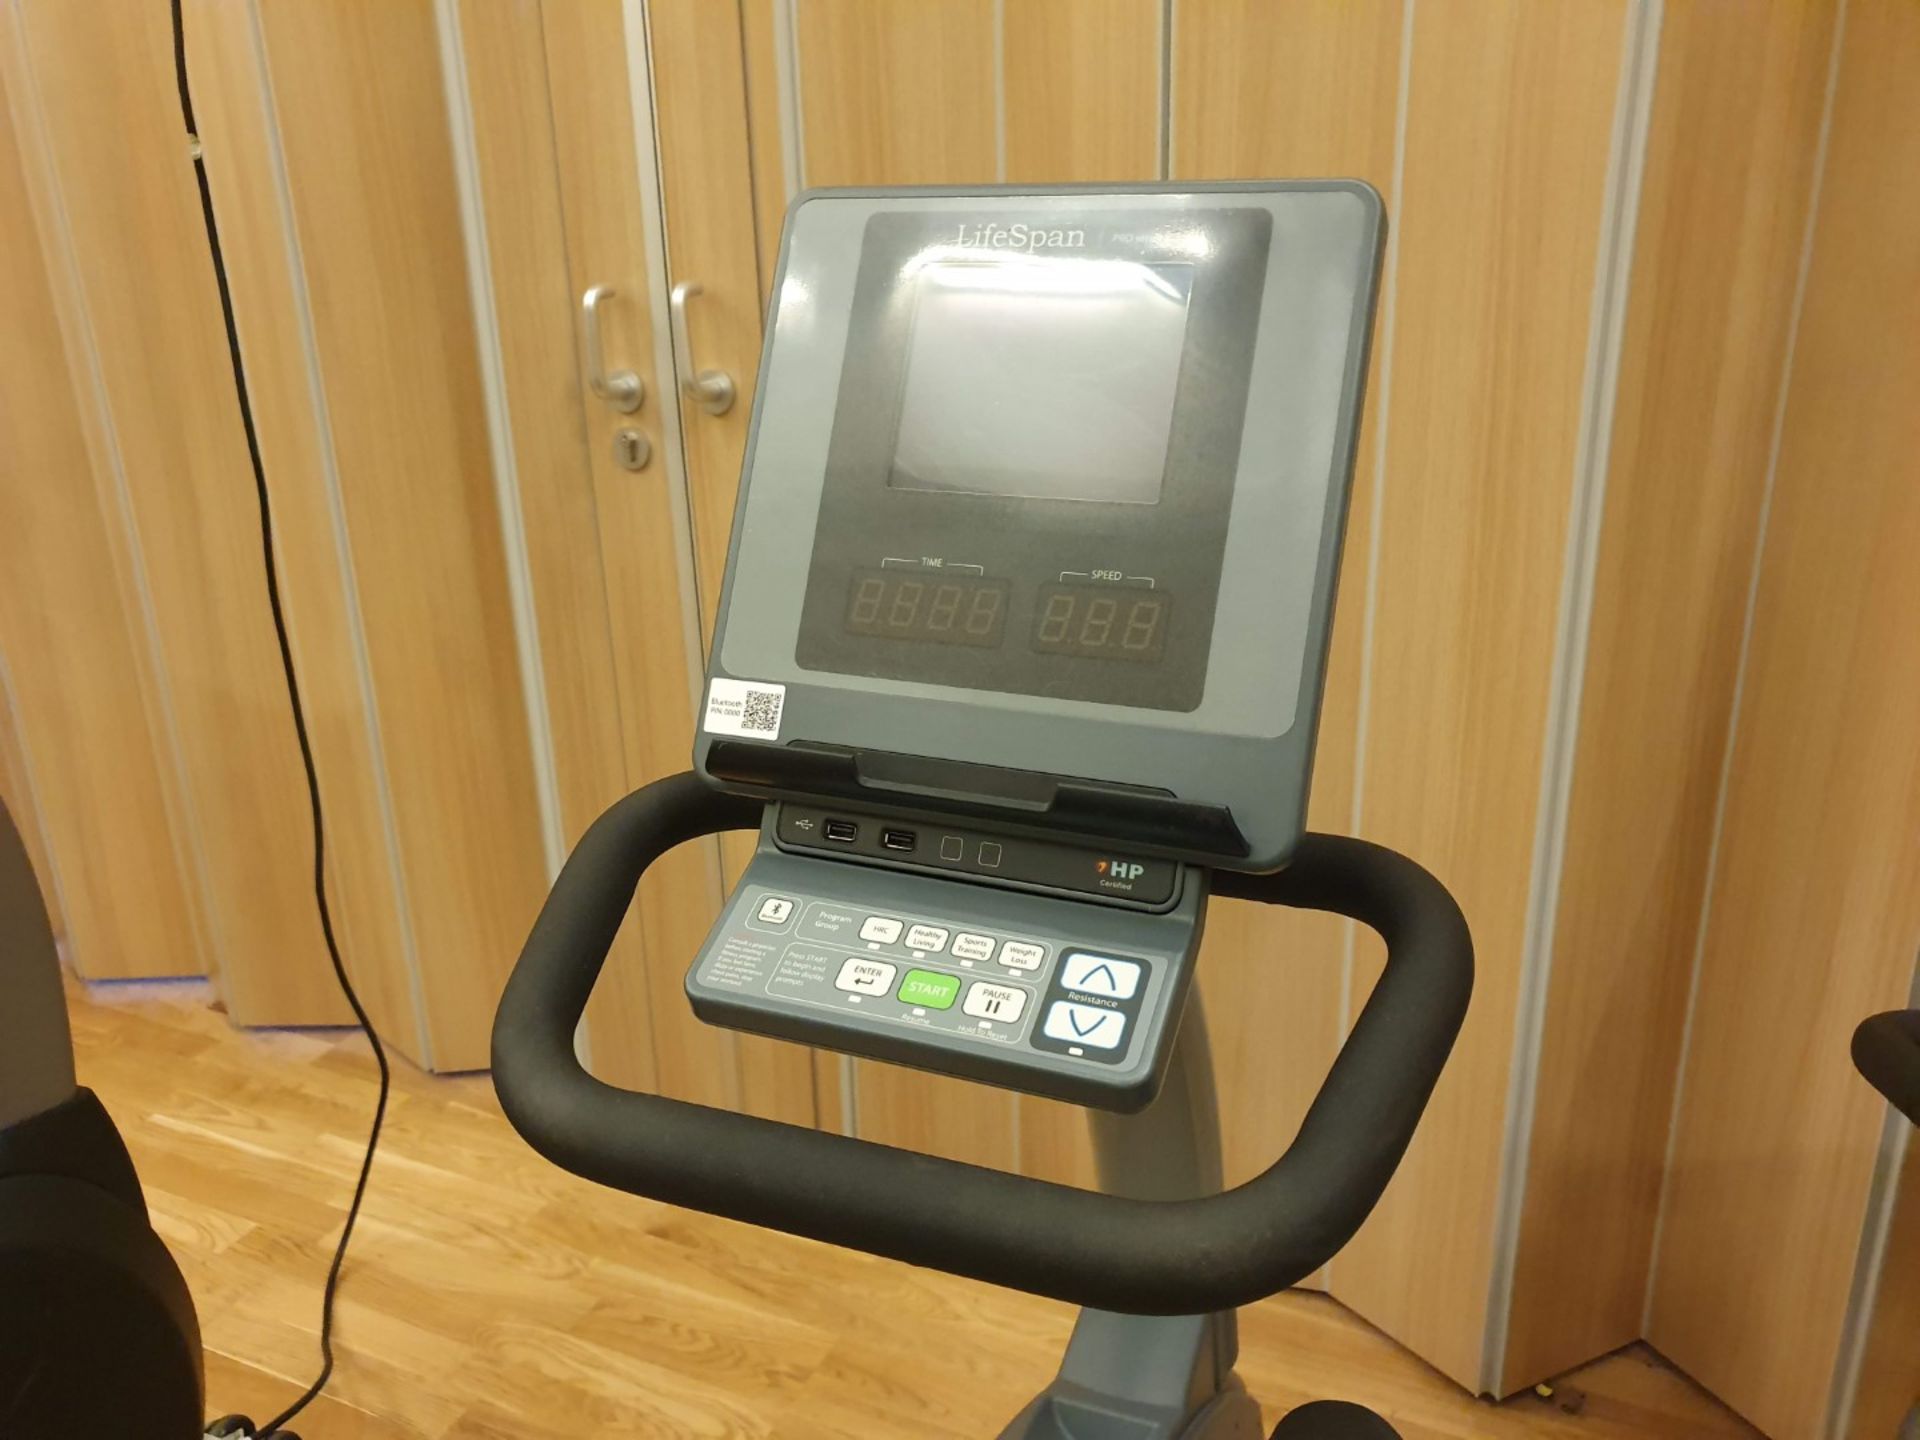 1 x Lifespan R7000 Pro Series Excercise Bike With USB Connectivity - Approx RRP £1,500 - CL552 - - Image 5 of 6